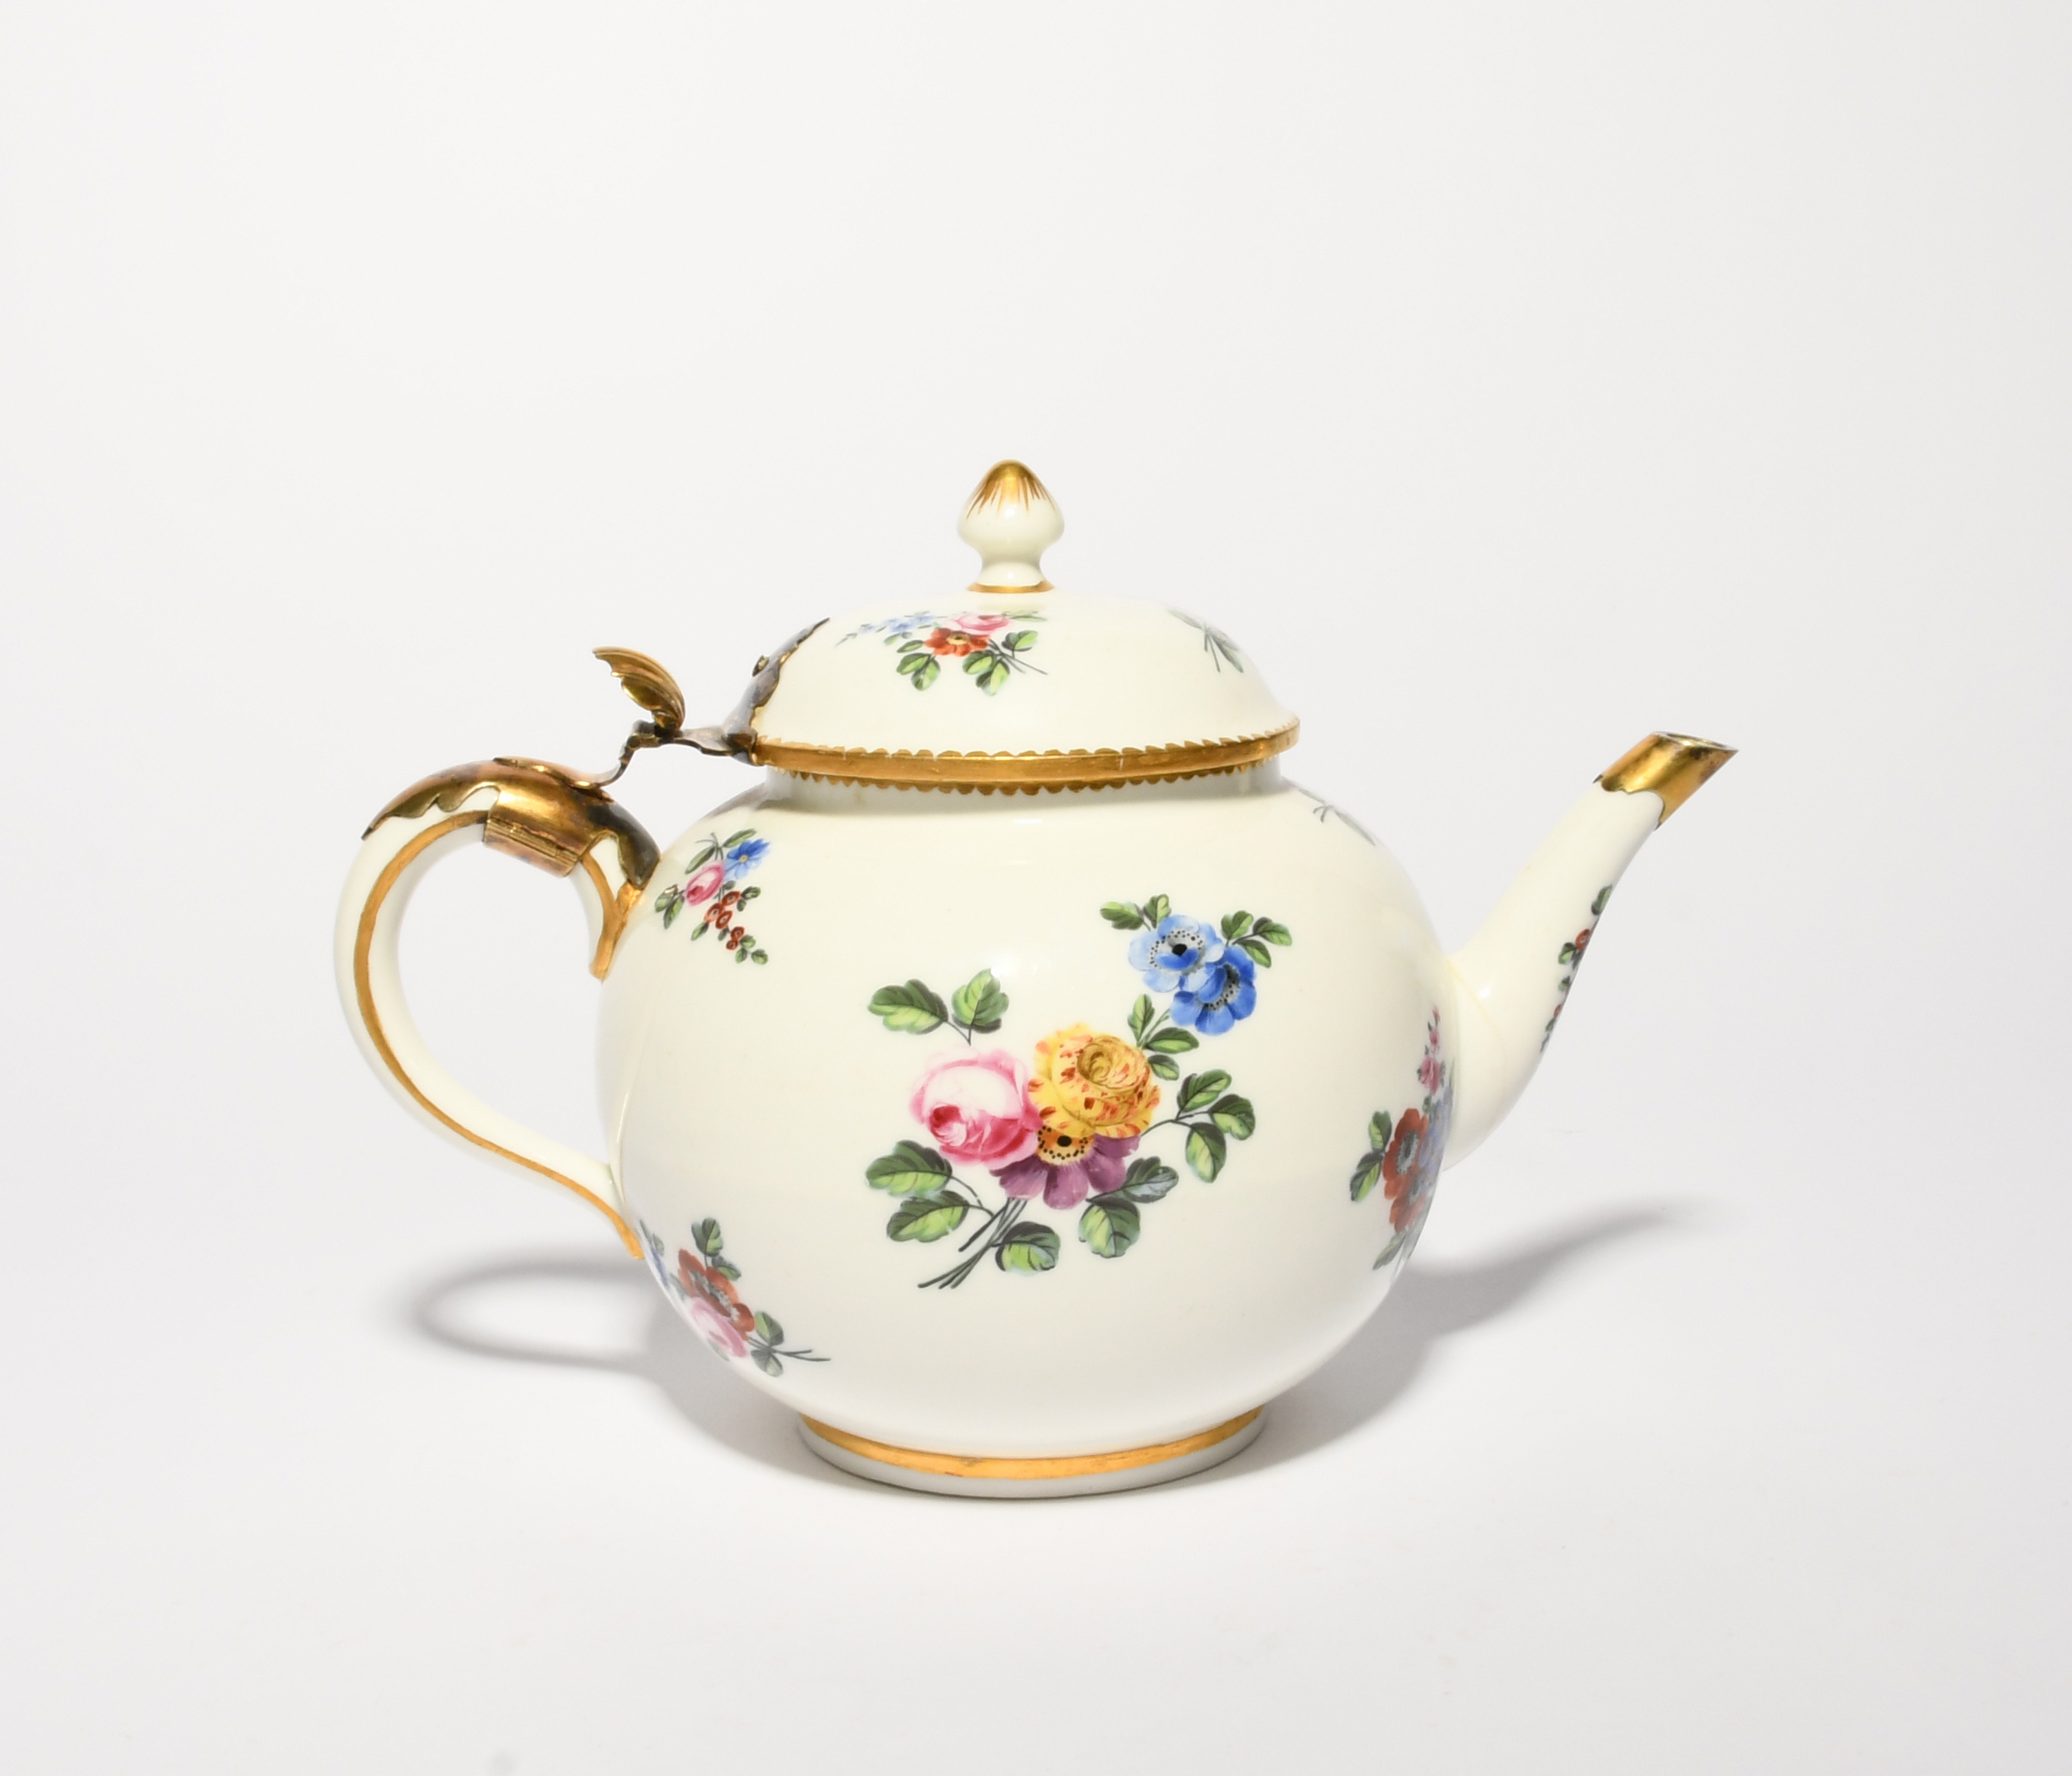 A large Sèvres teapot, c.1760, the globular body painted with sprays of European flowers on a - Image 2 of 3